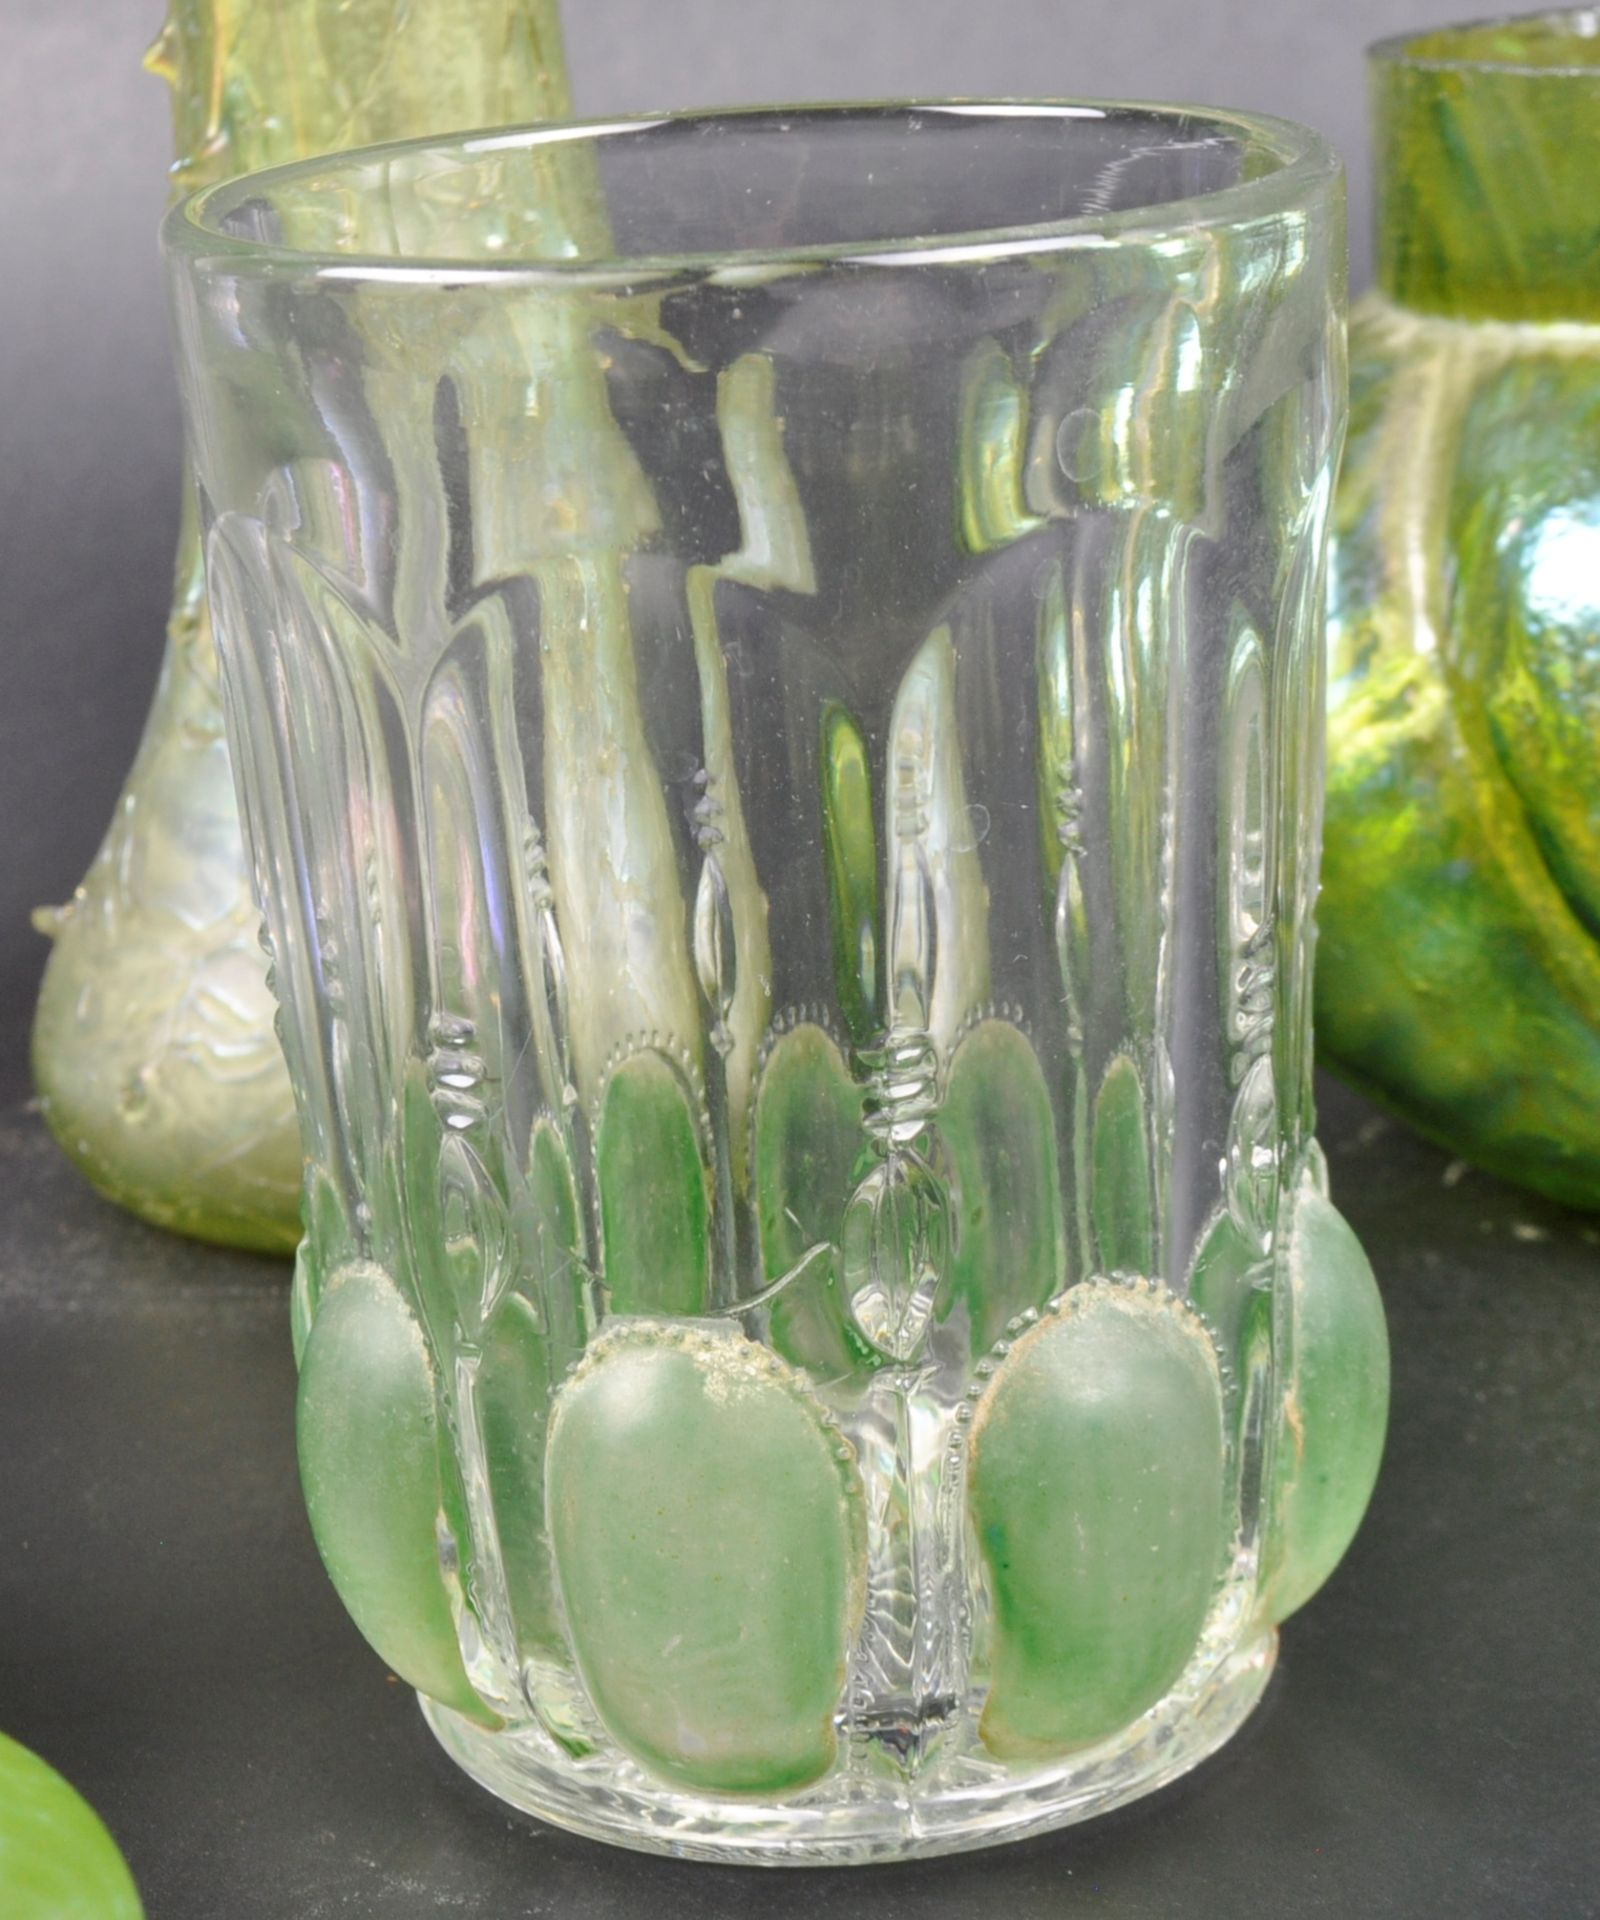 SELECTION OF ART NOUVEAU PEARLESCENT GLASS VASES - Image 6 of 13